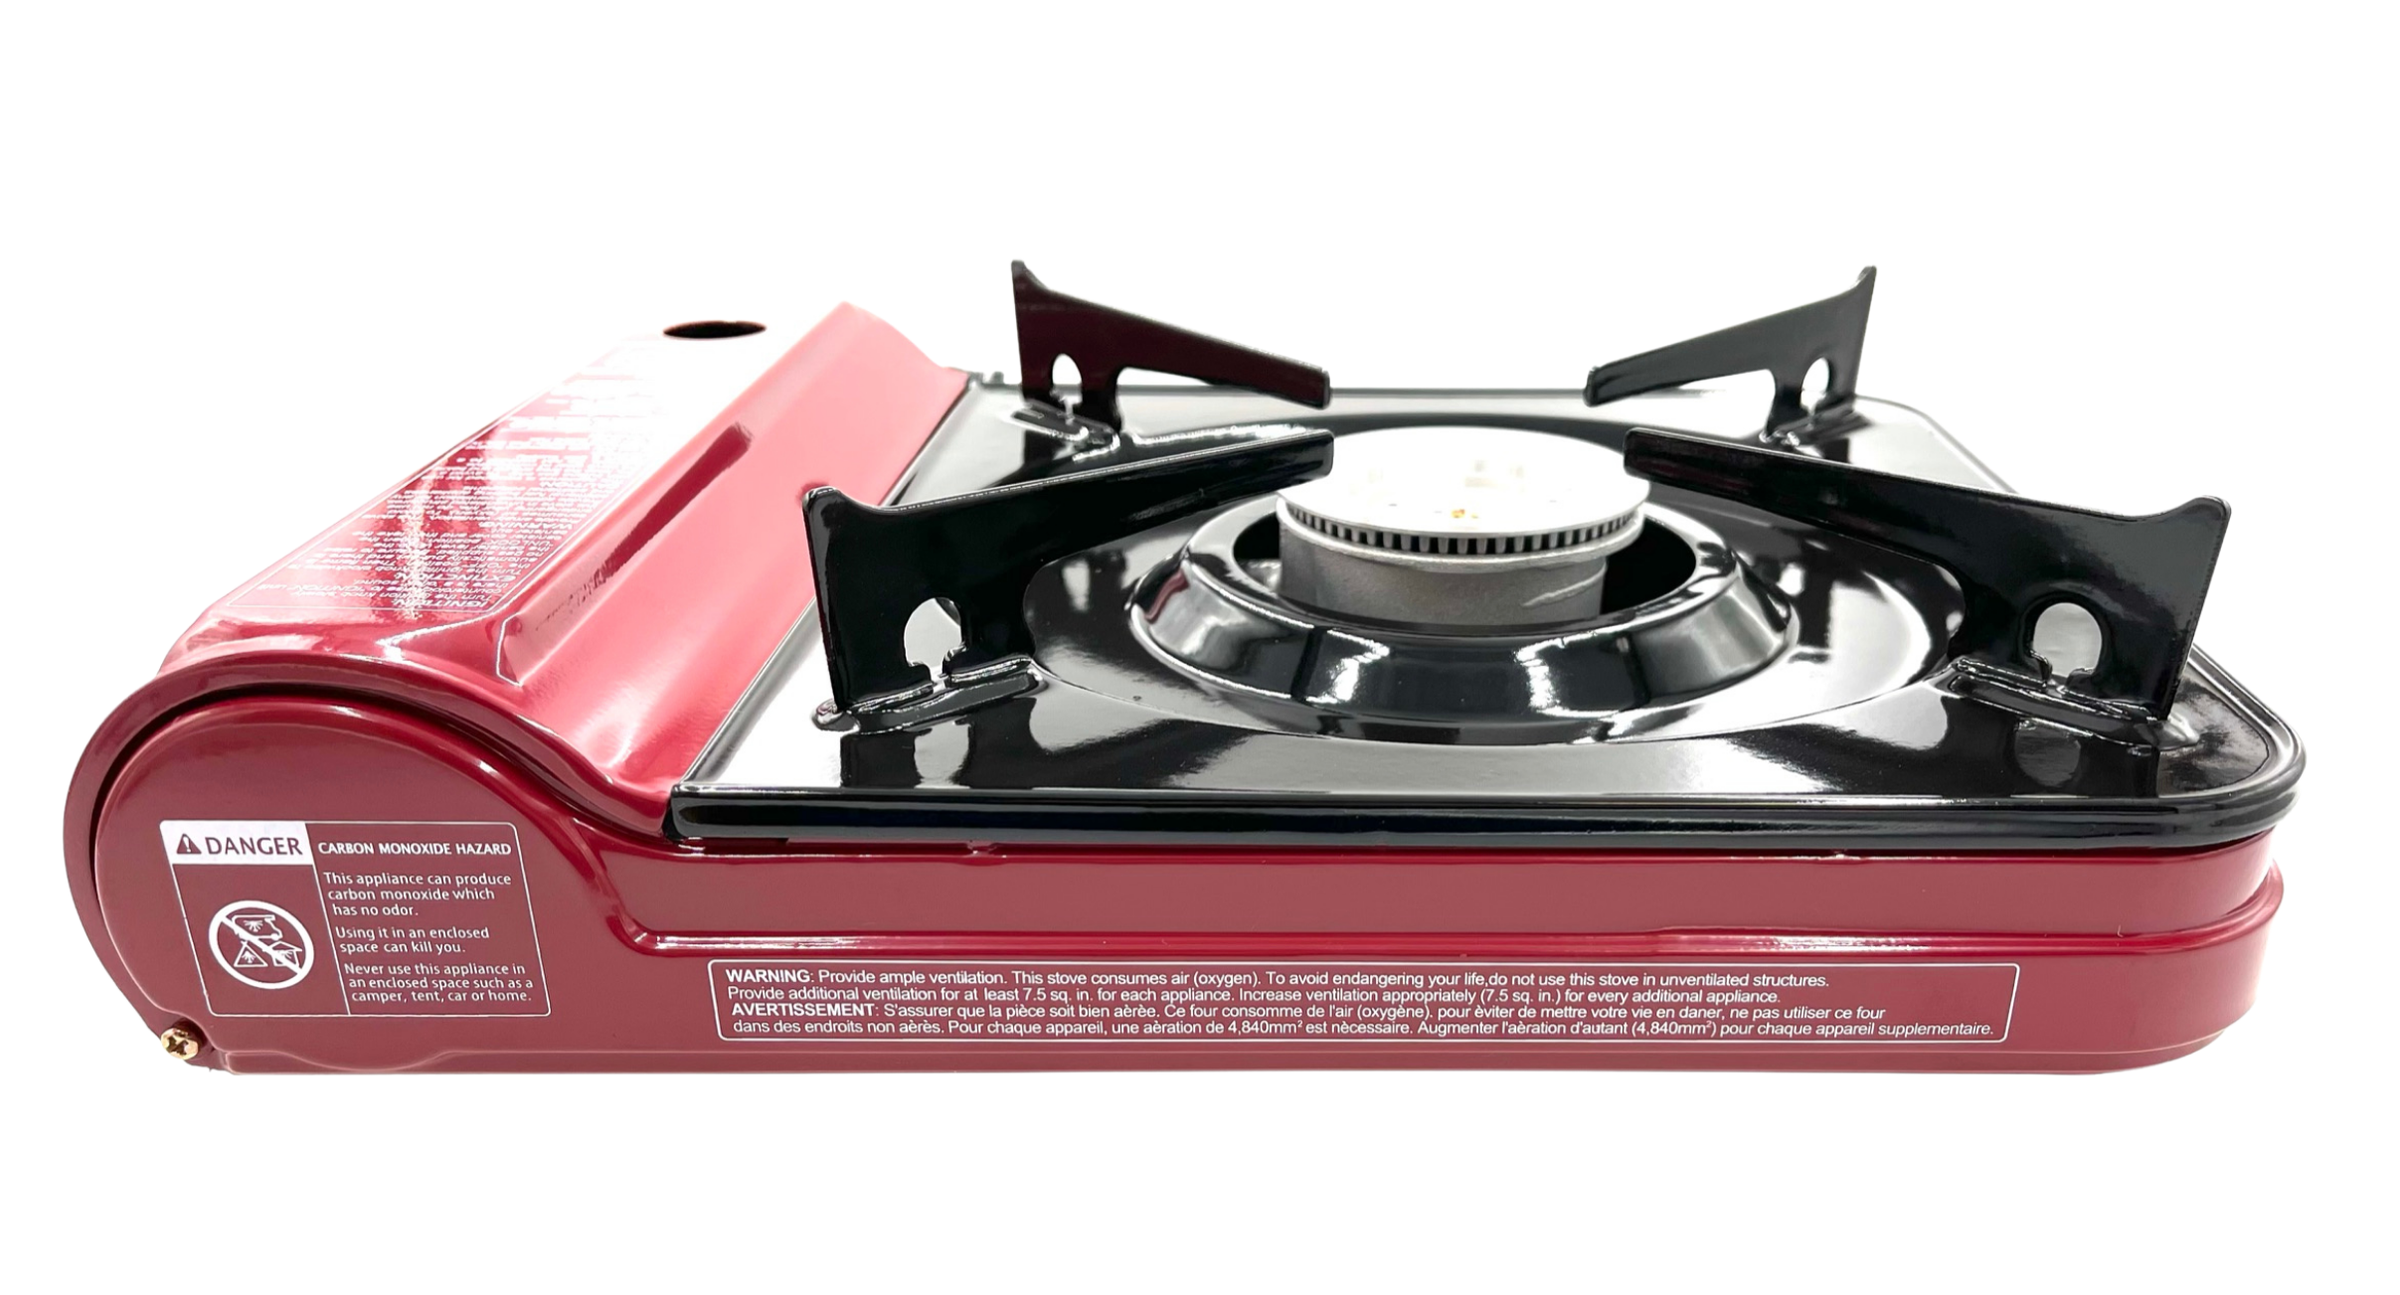 Portable gas stove - Gas stove for indoor use